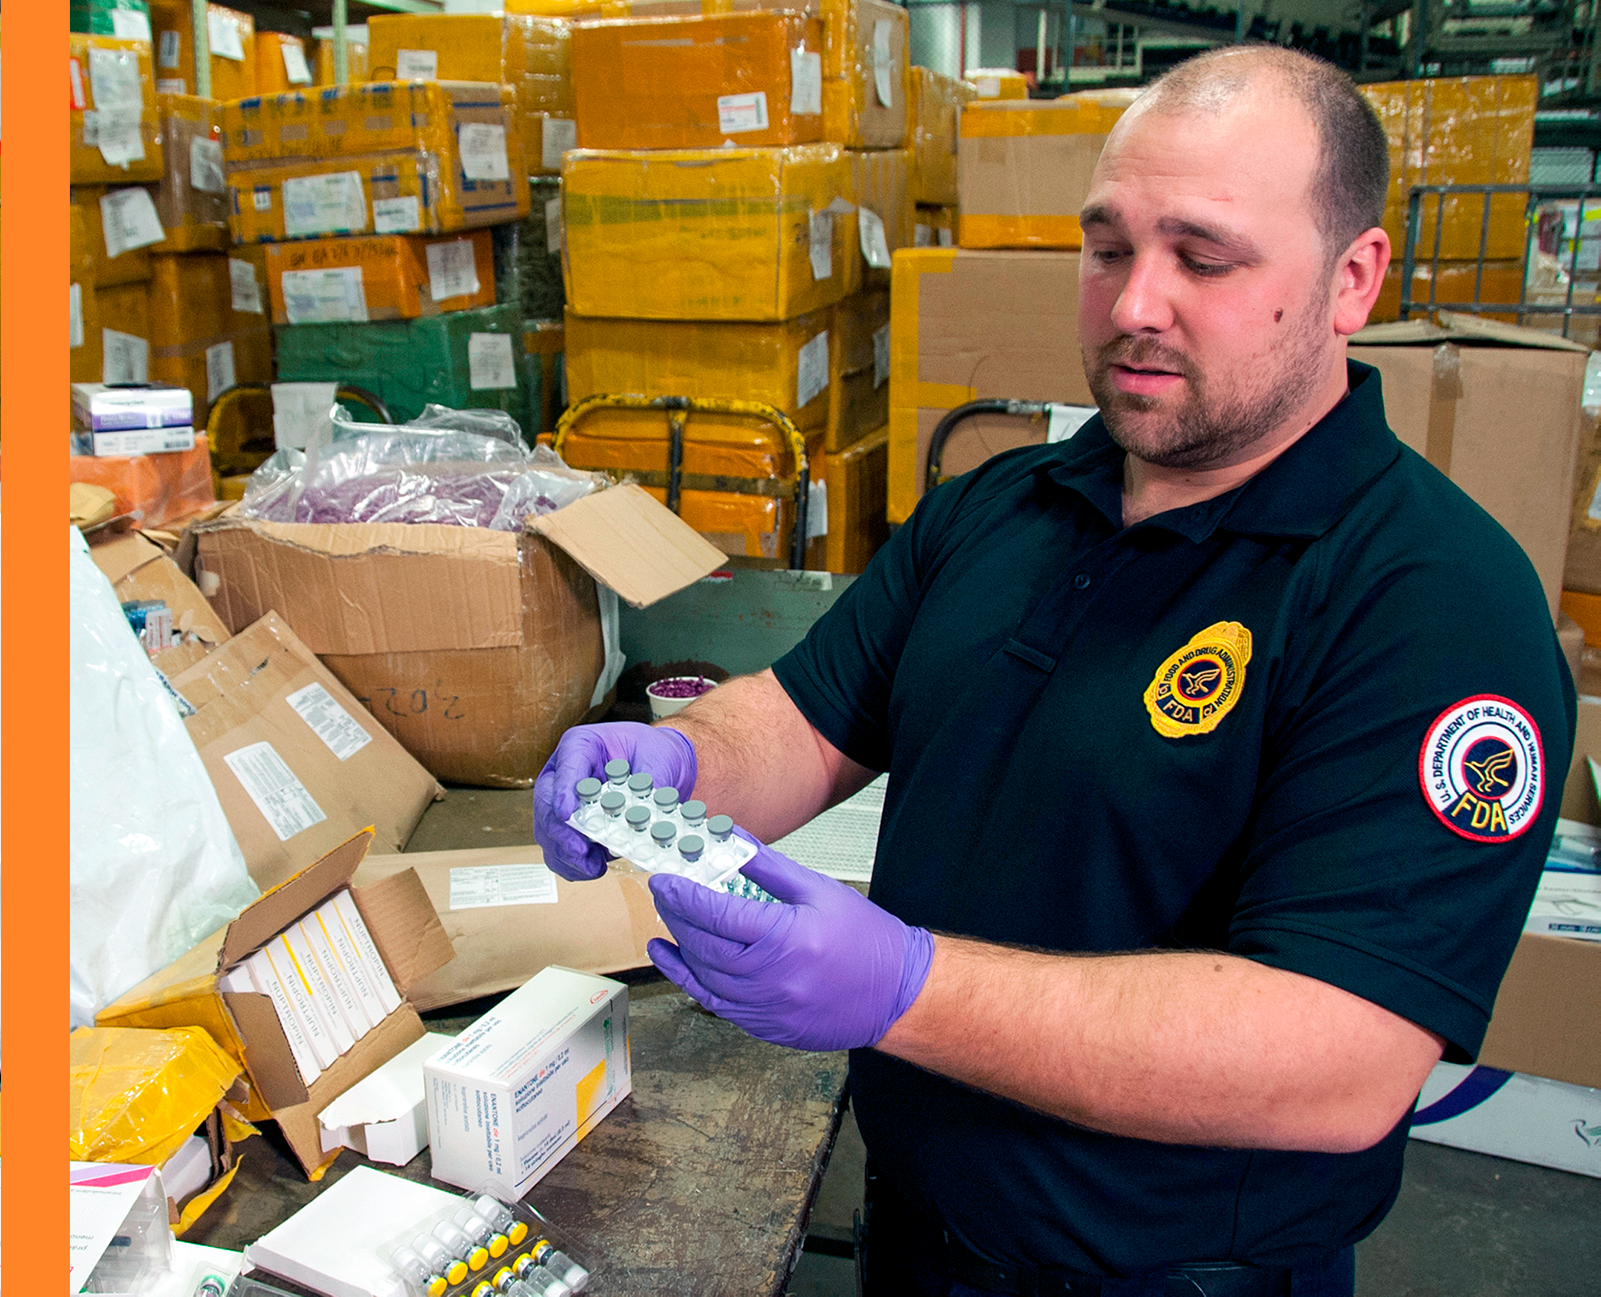 FDA inspector examines pharmaceuticals in a warehouse location